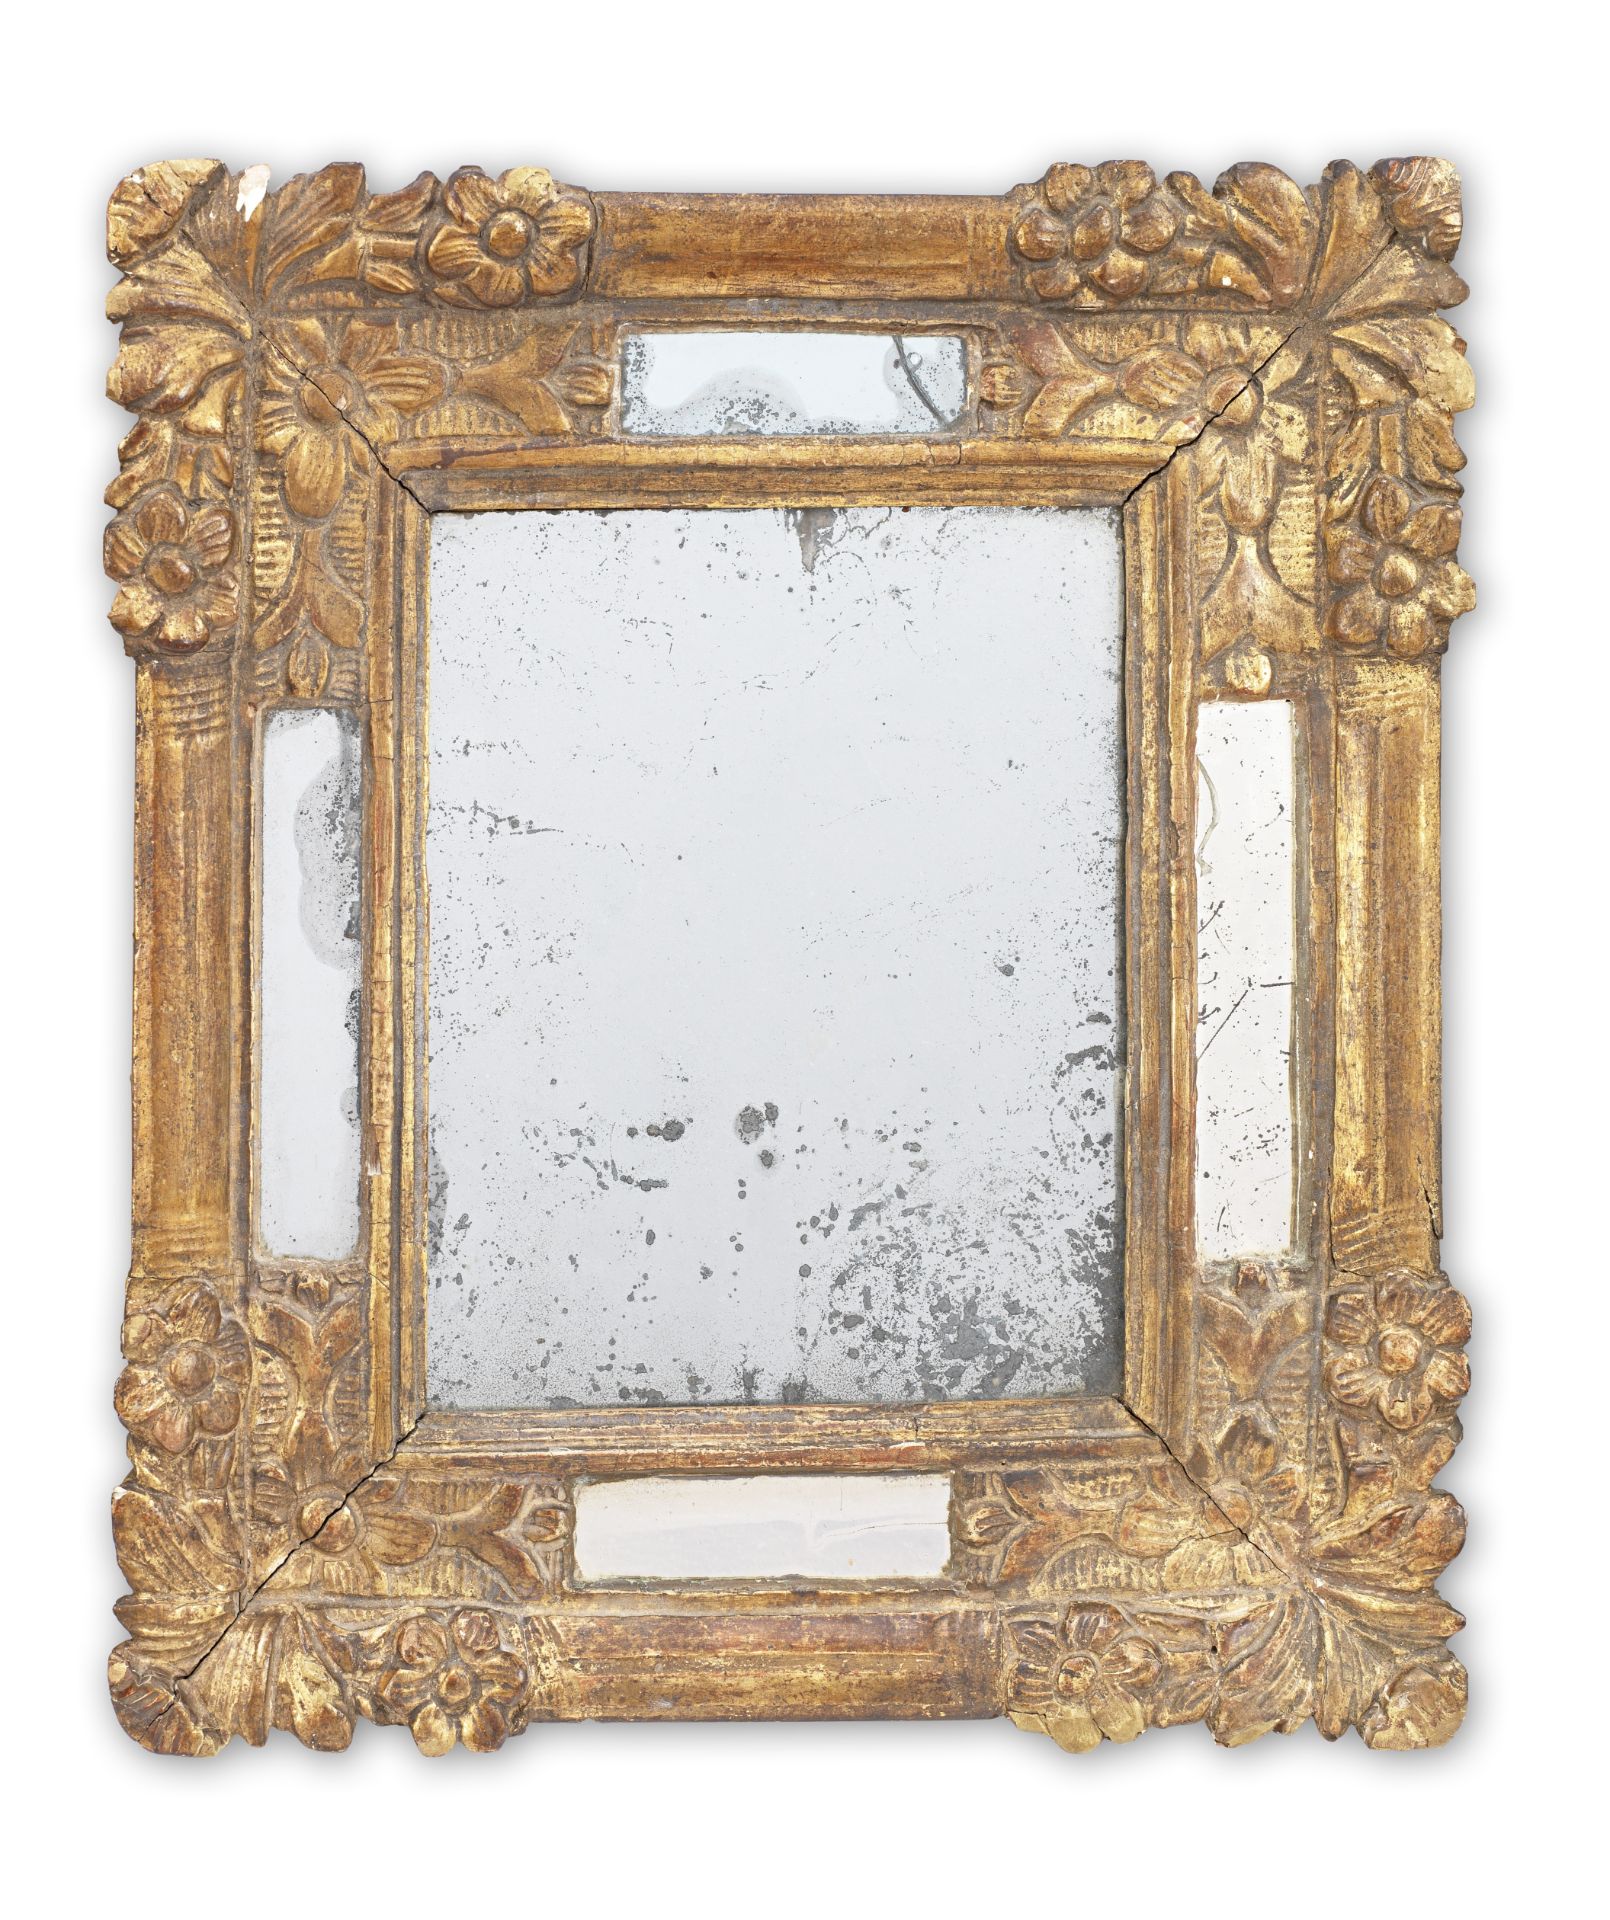 A pair of small gilt softwood wall mirrors, French, in the early 18th century Régence manner (2)